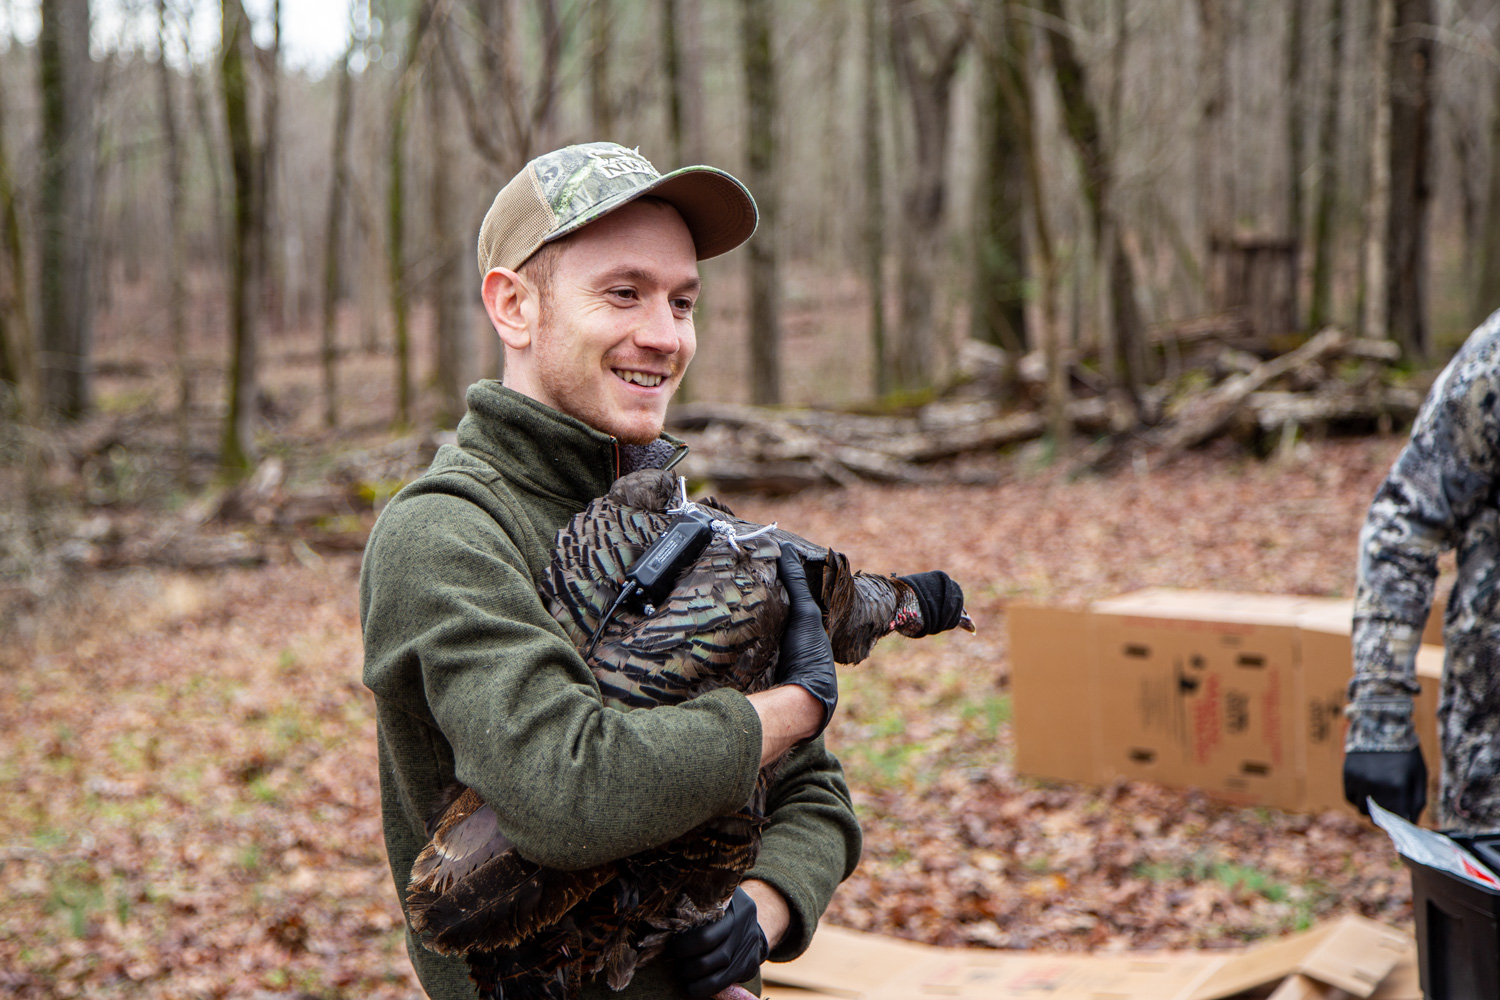 NWTF staffer with a hen turkey that has been affixed with a tracking device for research purposes